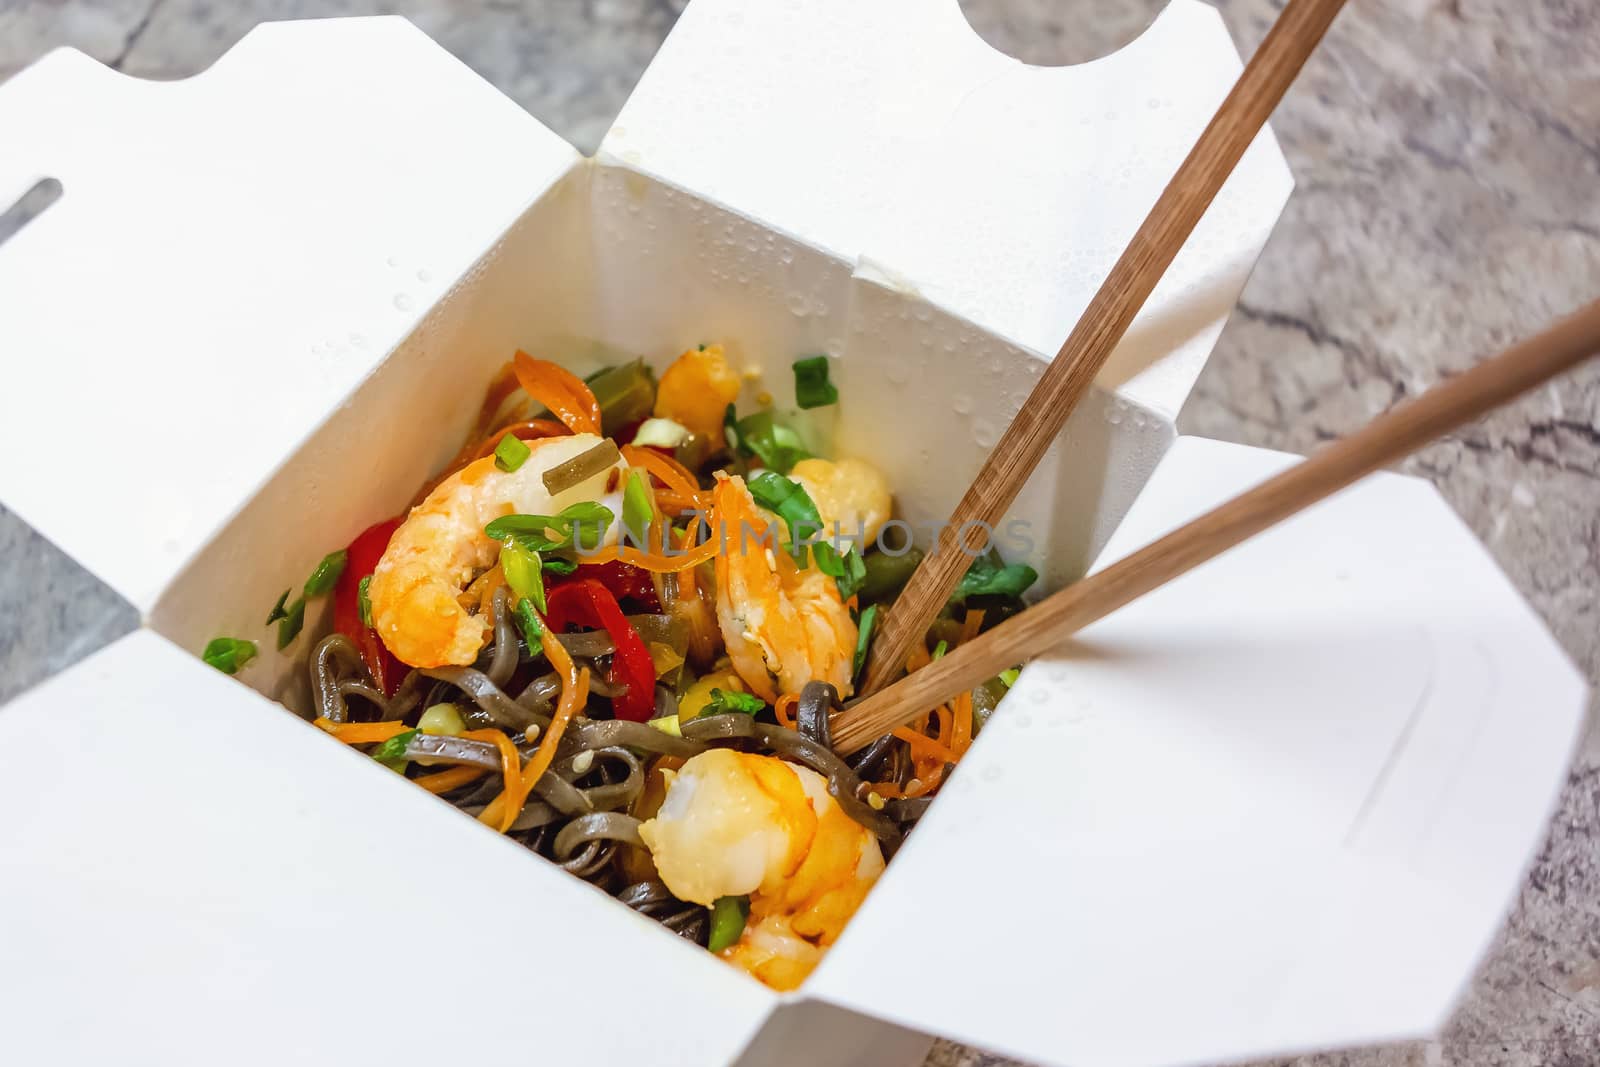 Traditional Chinese takeaway fast food - buckwheat soba noodles with vegetables and shrimps packed in a cardboard box with chopsticks close-up - photo, image,